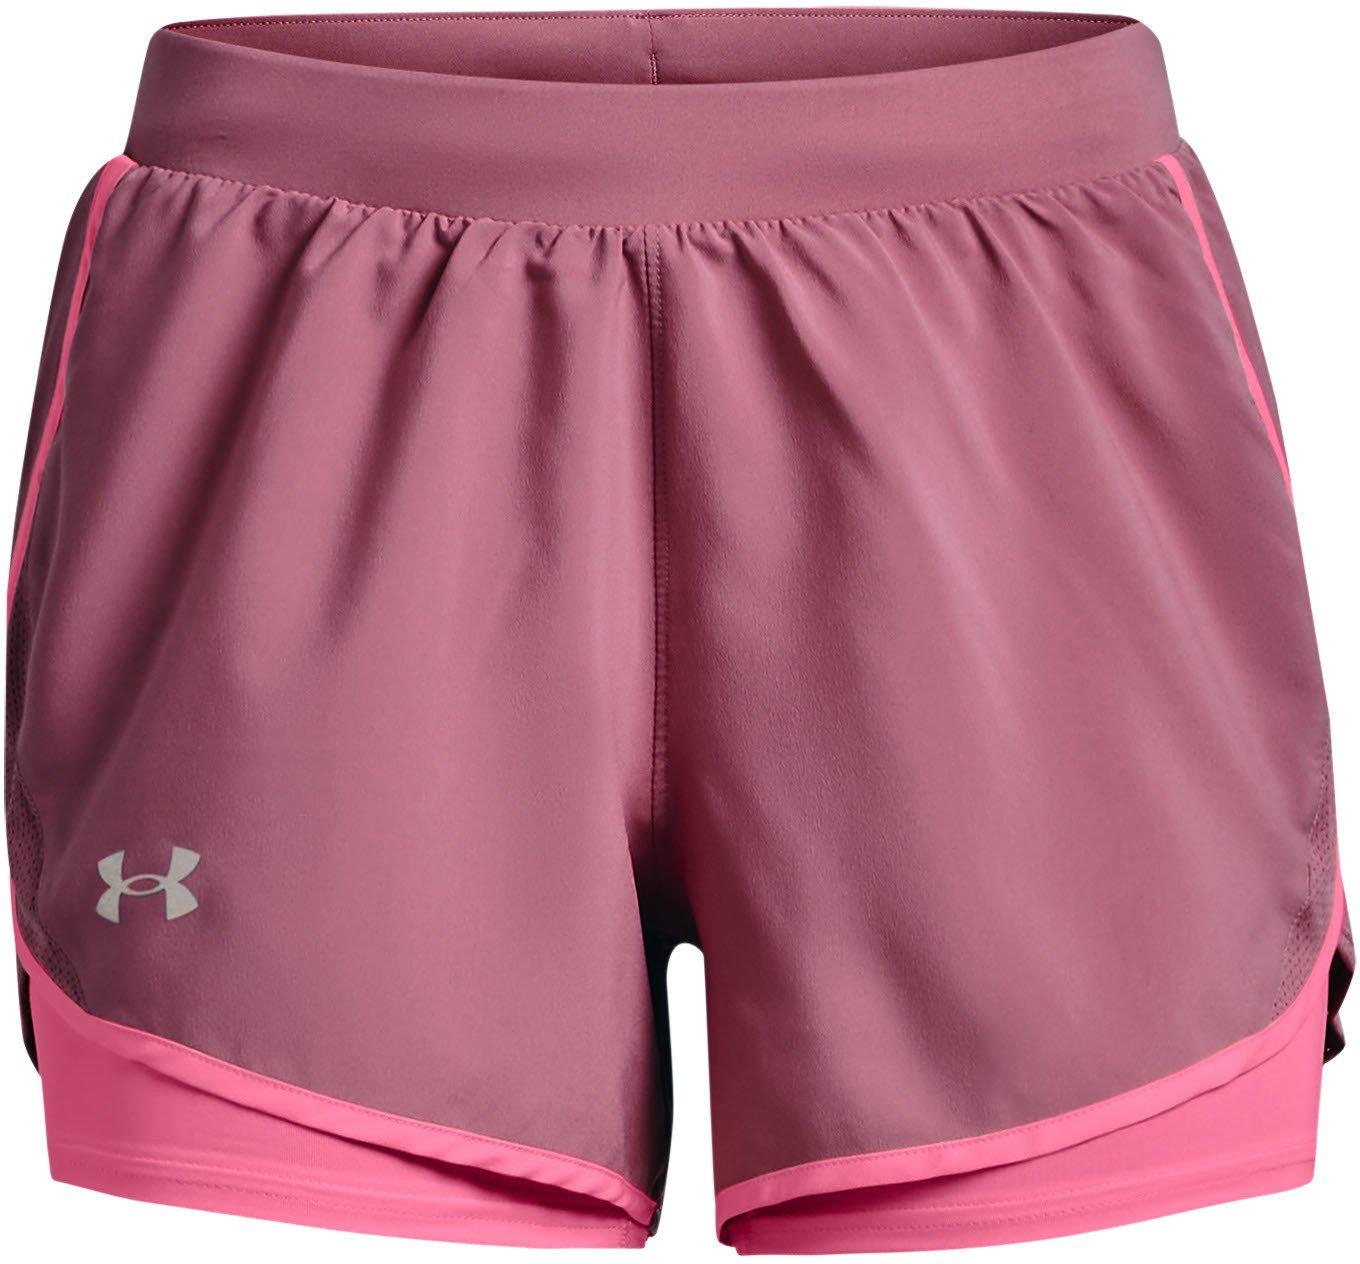 Under Armour Fly By 2.0 2N1 Short-PNK M